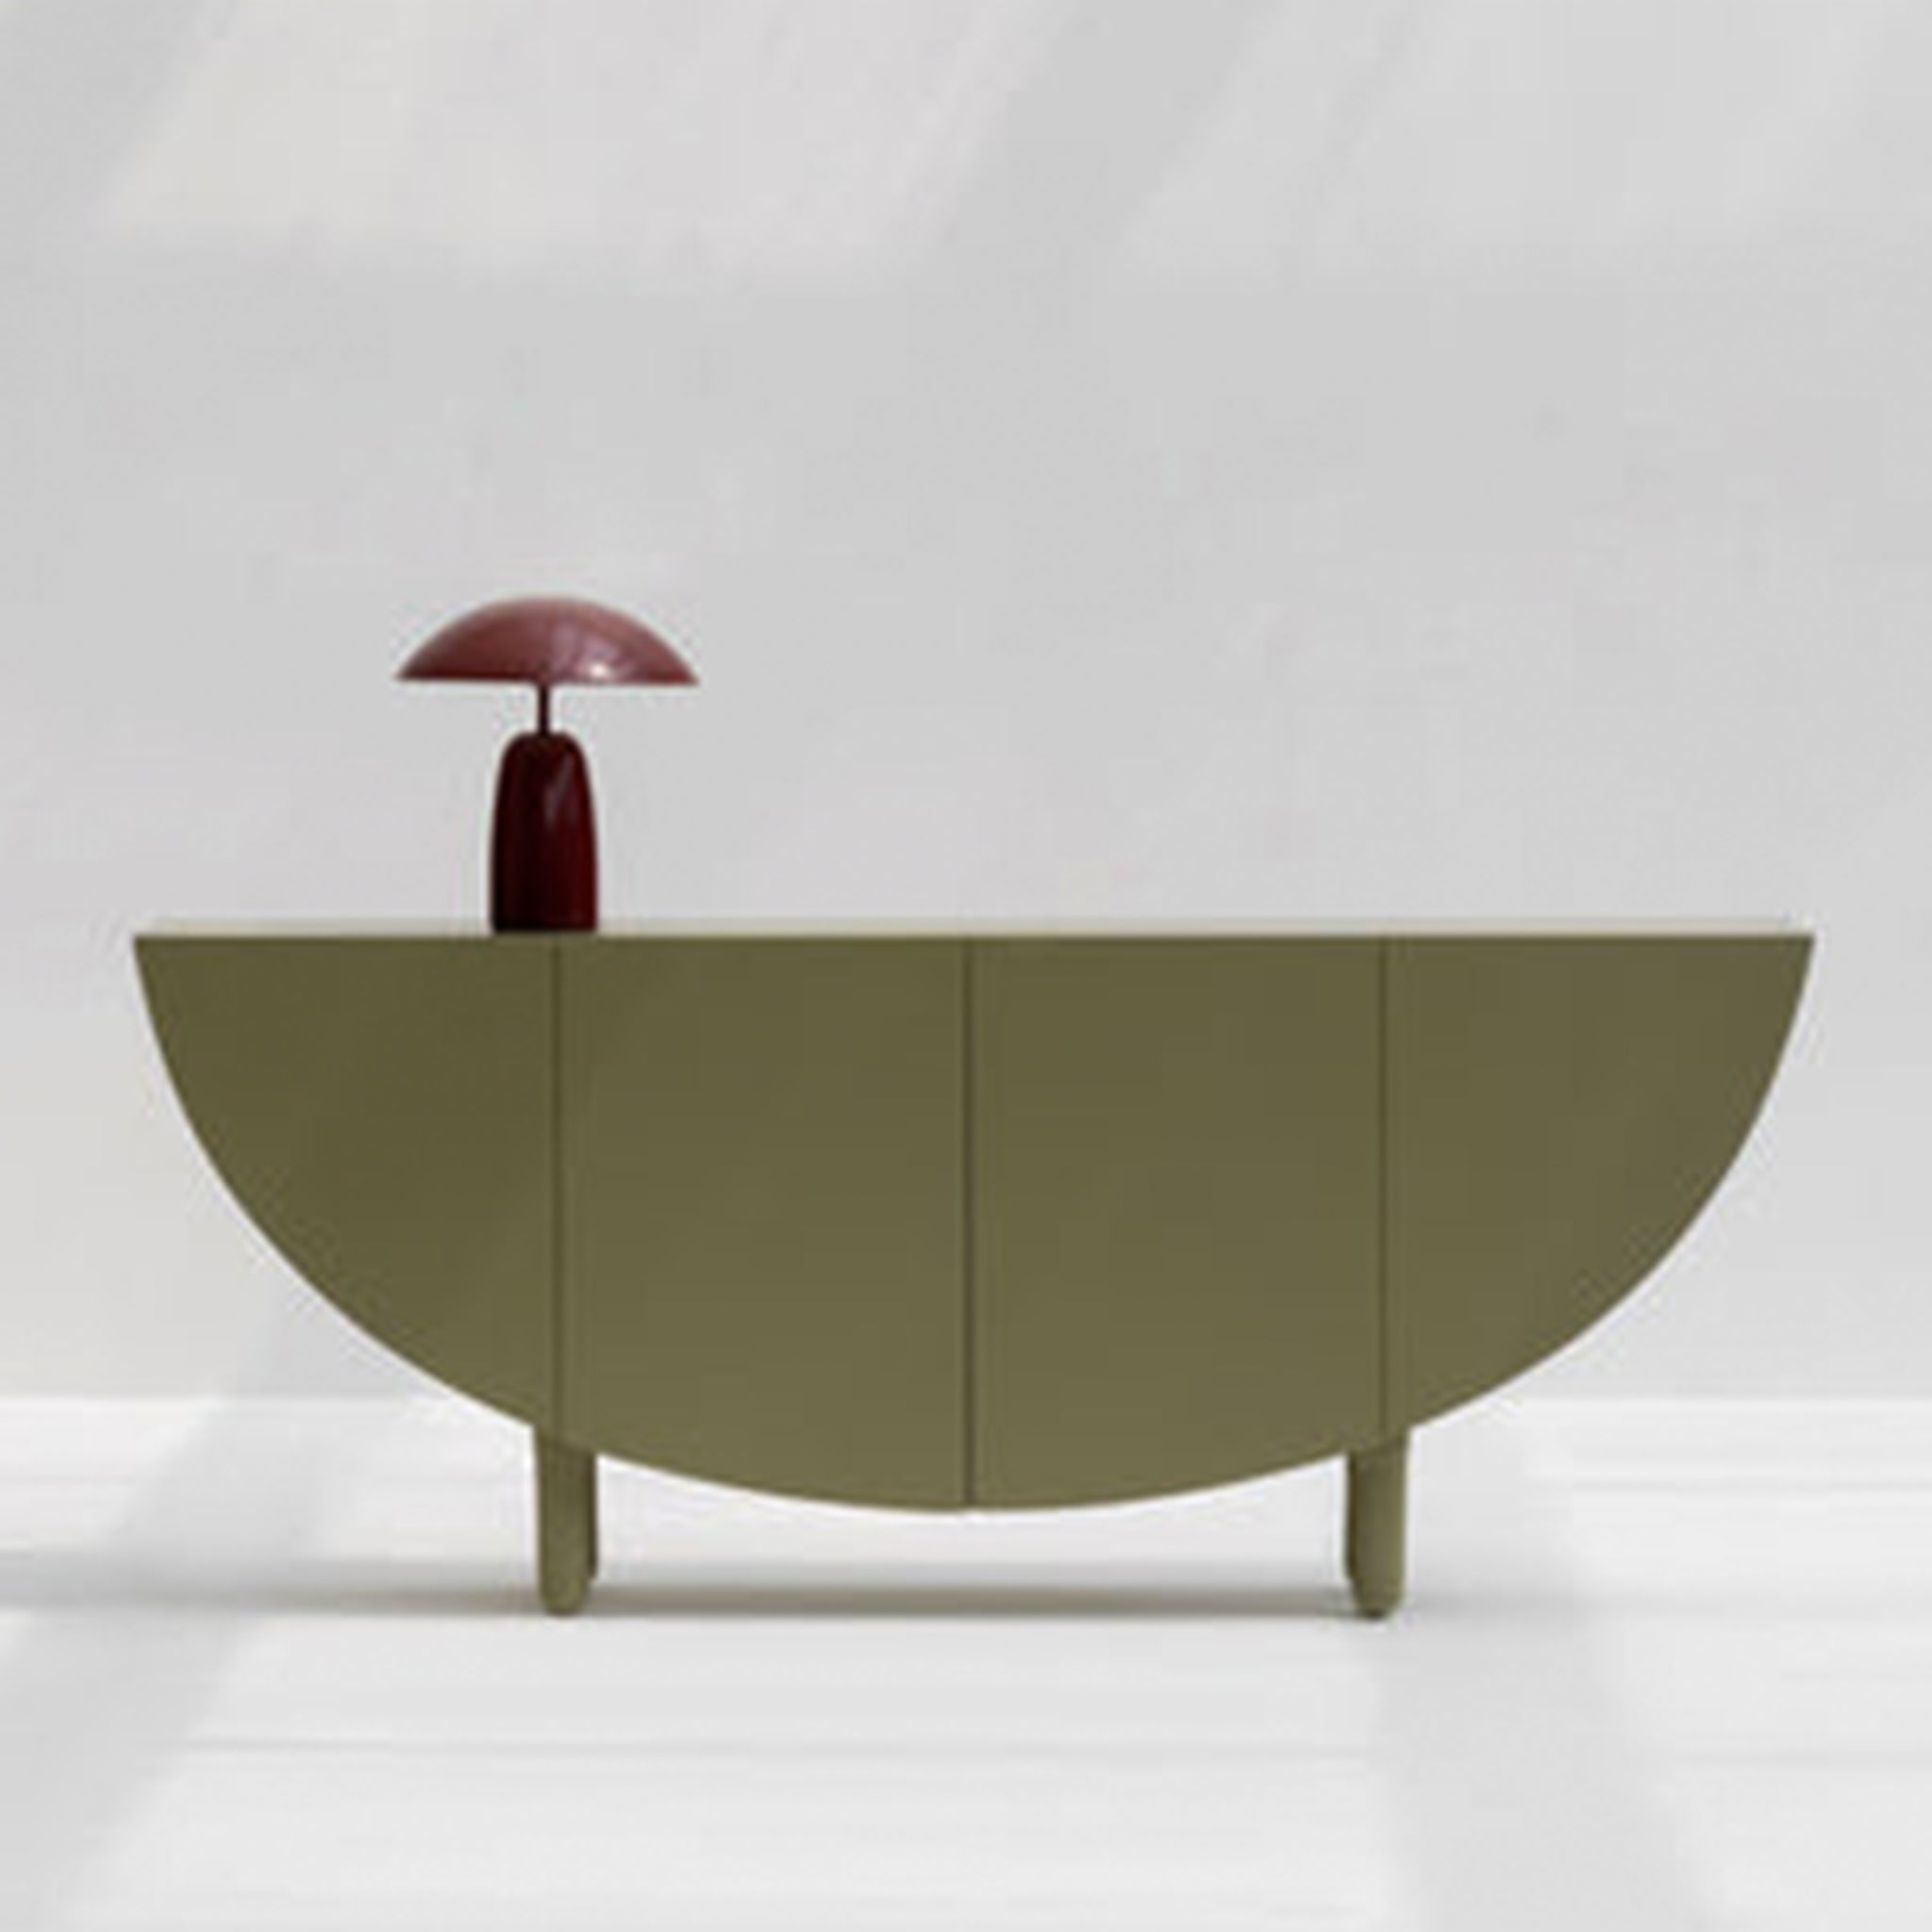 A minimalist olive green sideboard with a half-moon design, featuring a burgundy table lamp on top, set against a light gray background.